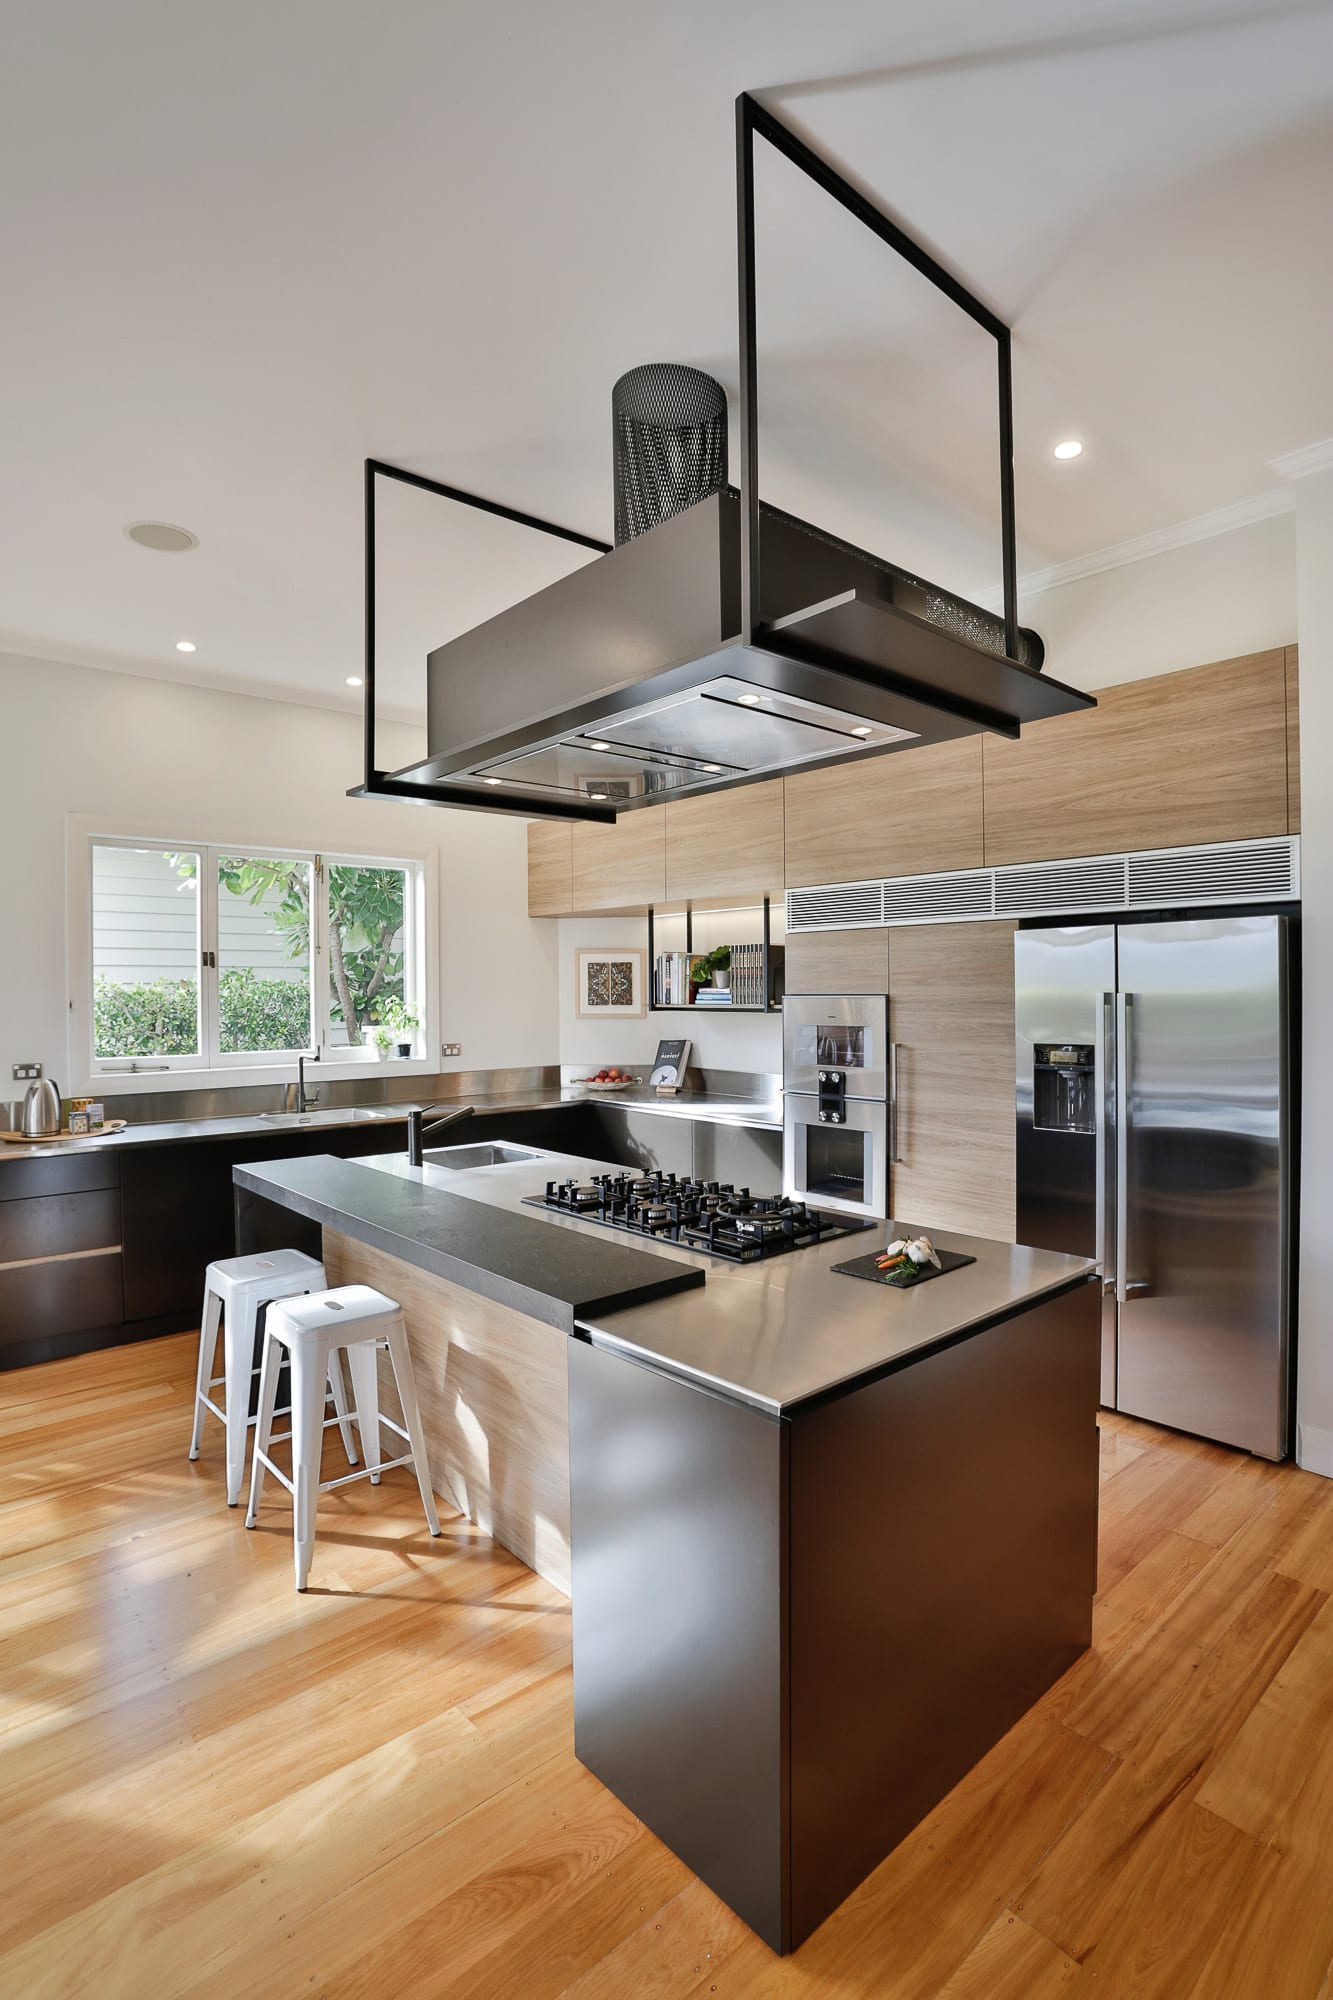 13 timeless kitchen designs to inspire | MiNDFOOD | Style